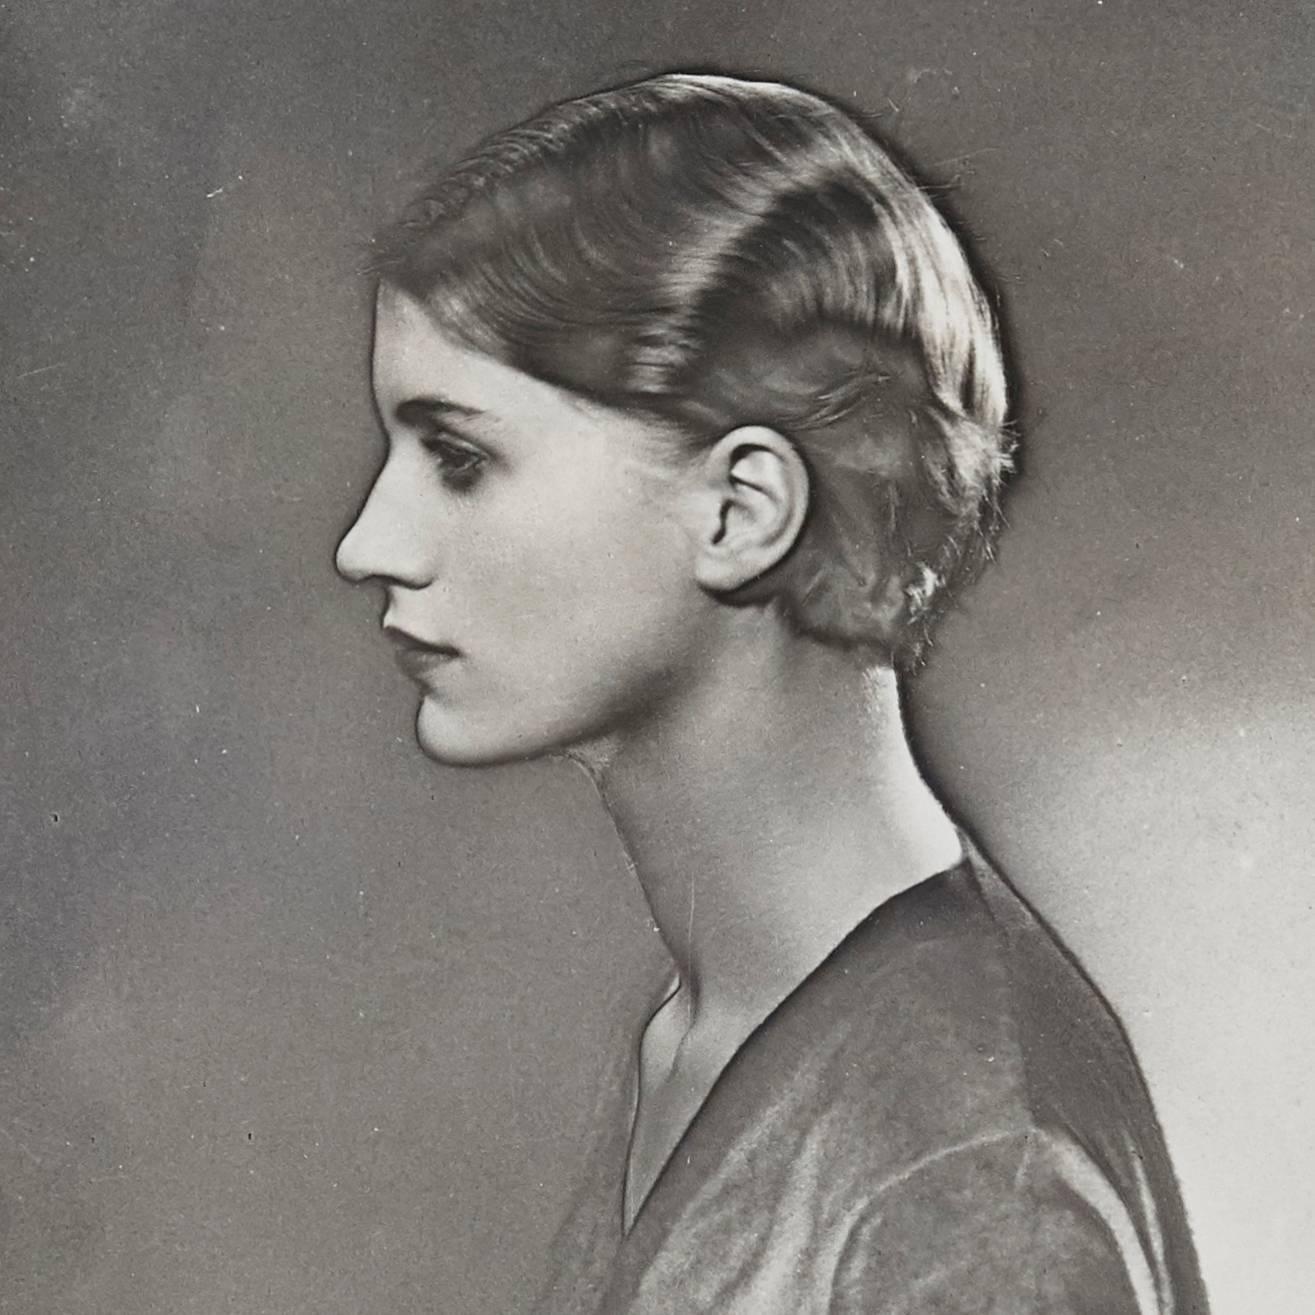 Man Ray photography of Lee Miller, 1932.

A posthumous print from the original negative in 1977 by Pierre Gassmann.

Gelatin silver bromide.

Born (Philadelphia, 1890-Paris, 1976) Emmanuel Radnitzky, Man Ray adopted his pseudonym in 1909 and